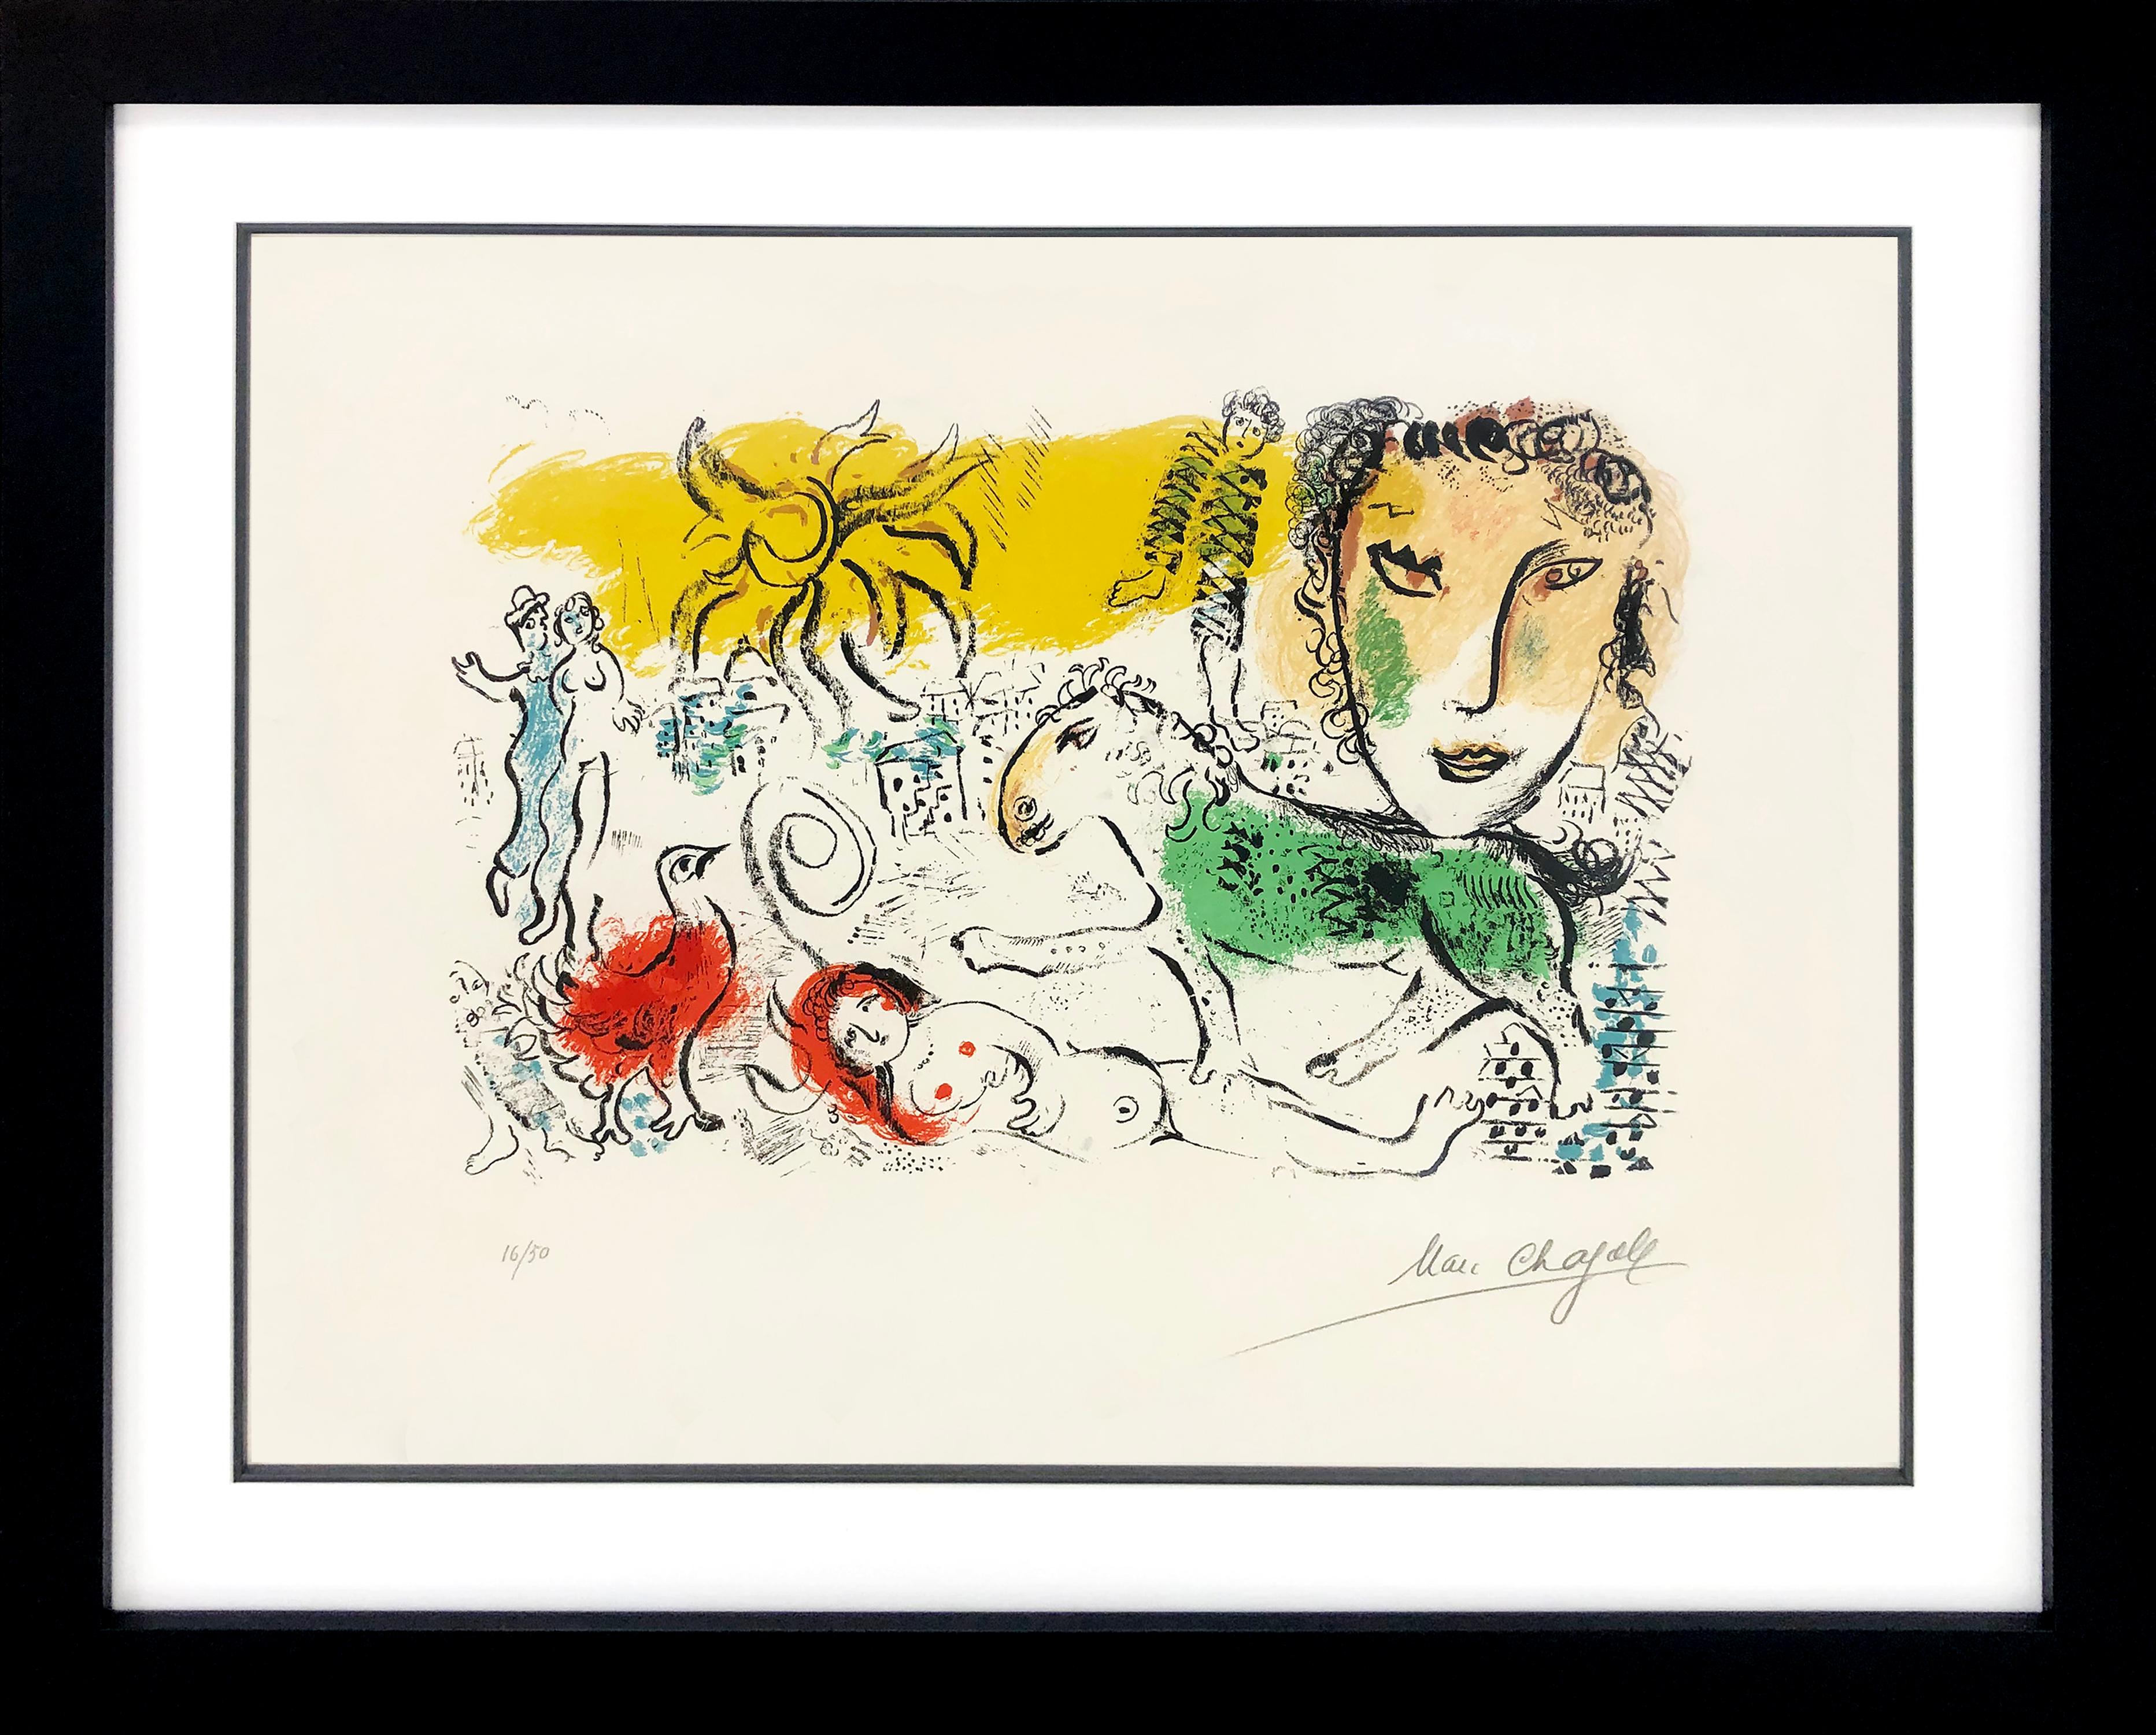 Figurative Print Marc Chagall - UNTITled FROM XXe SIECLE (MOURLOT 699)